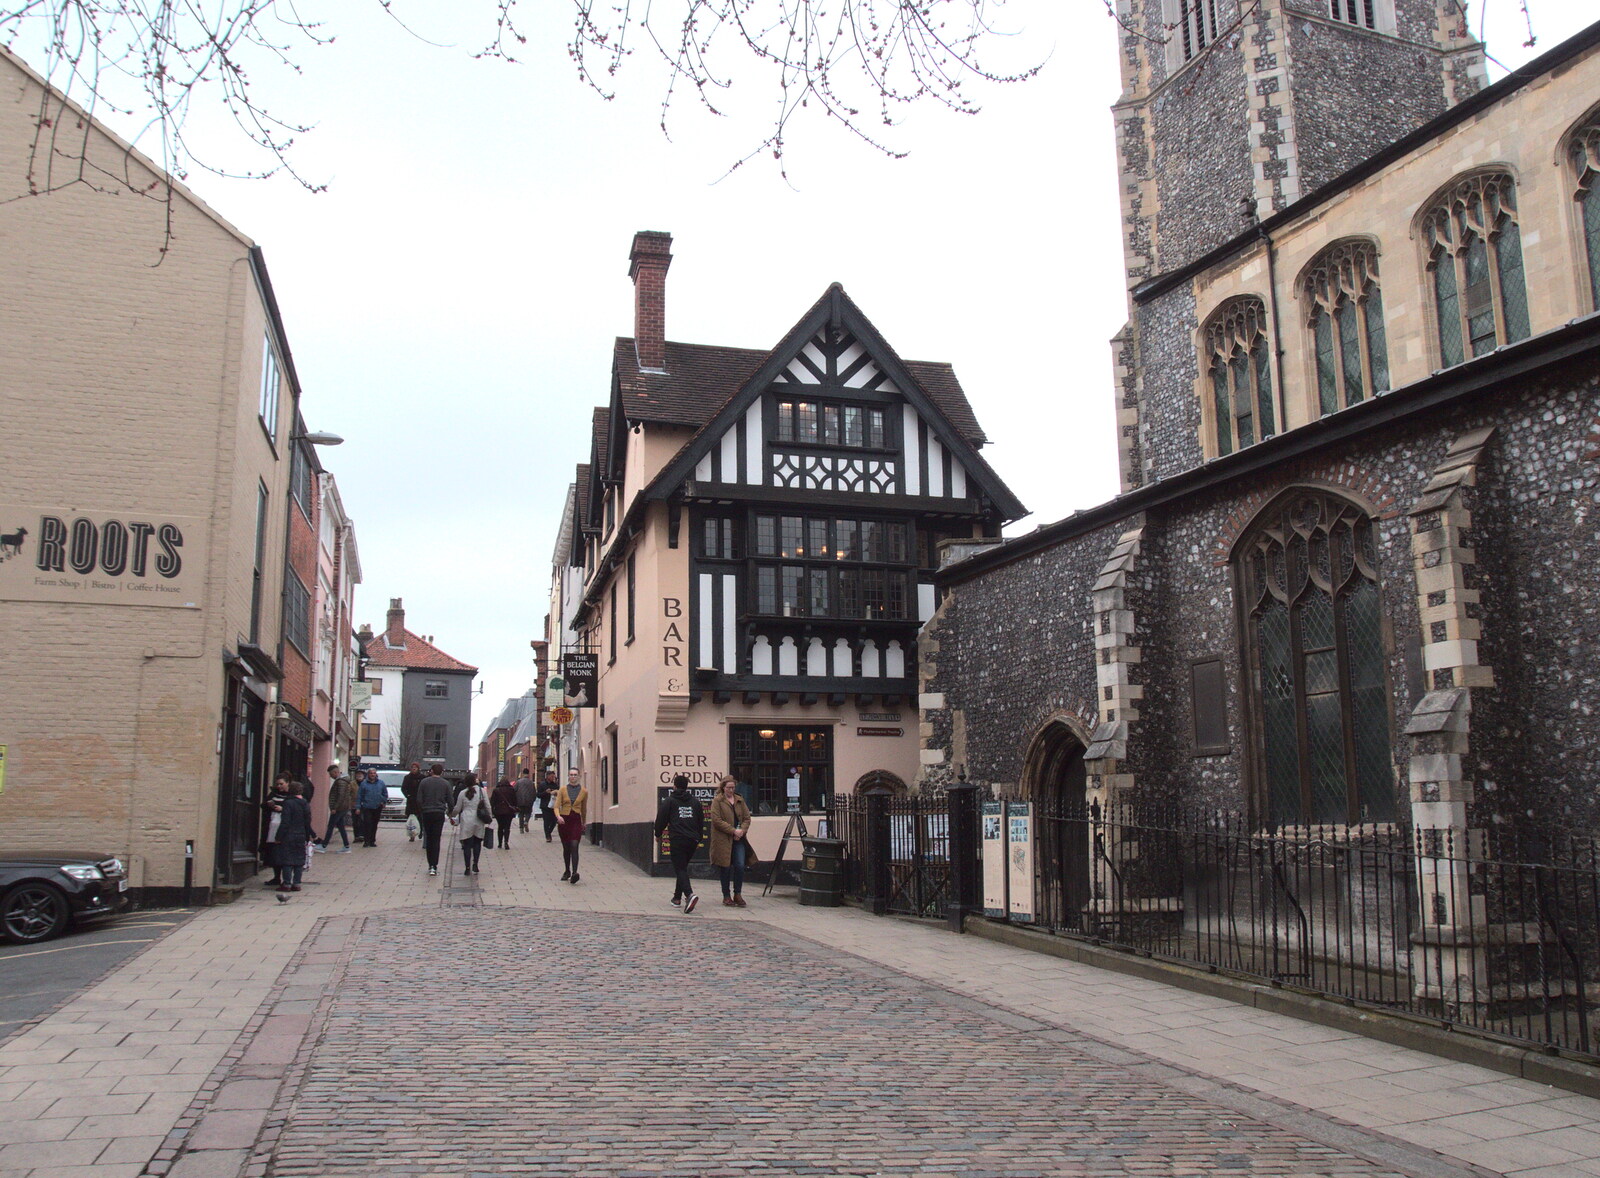 Pottergate, by St. John Maddermarket from A Couple of Trips to Norwich, Norfolk - 31st March 2018